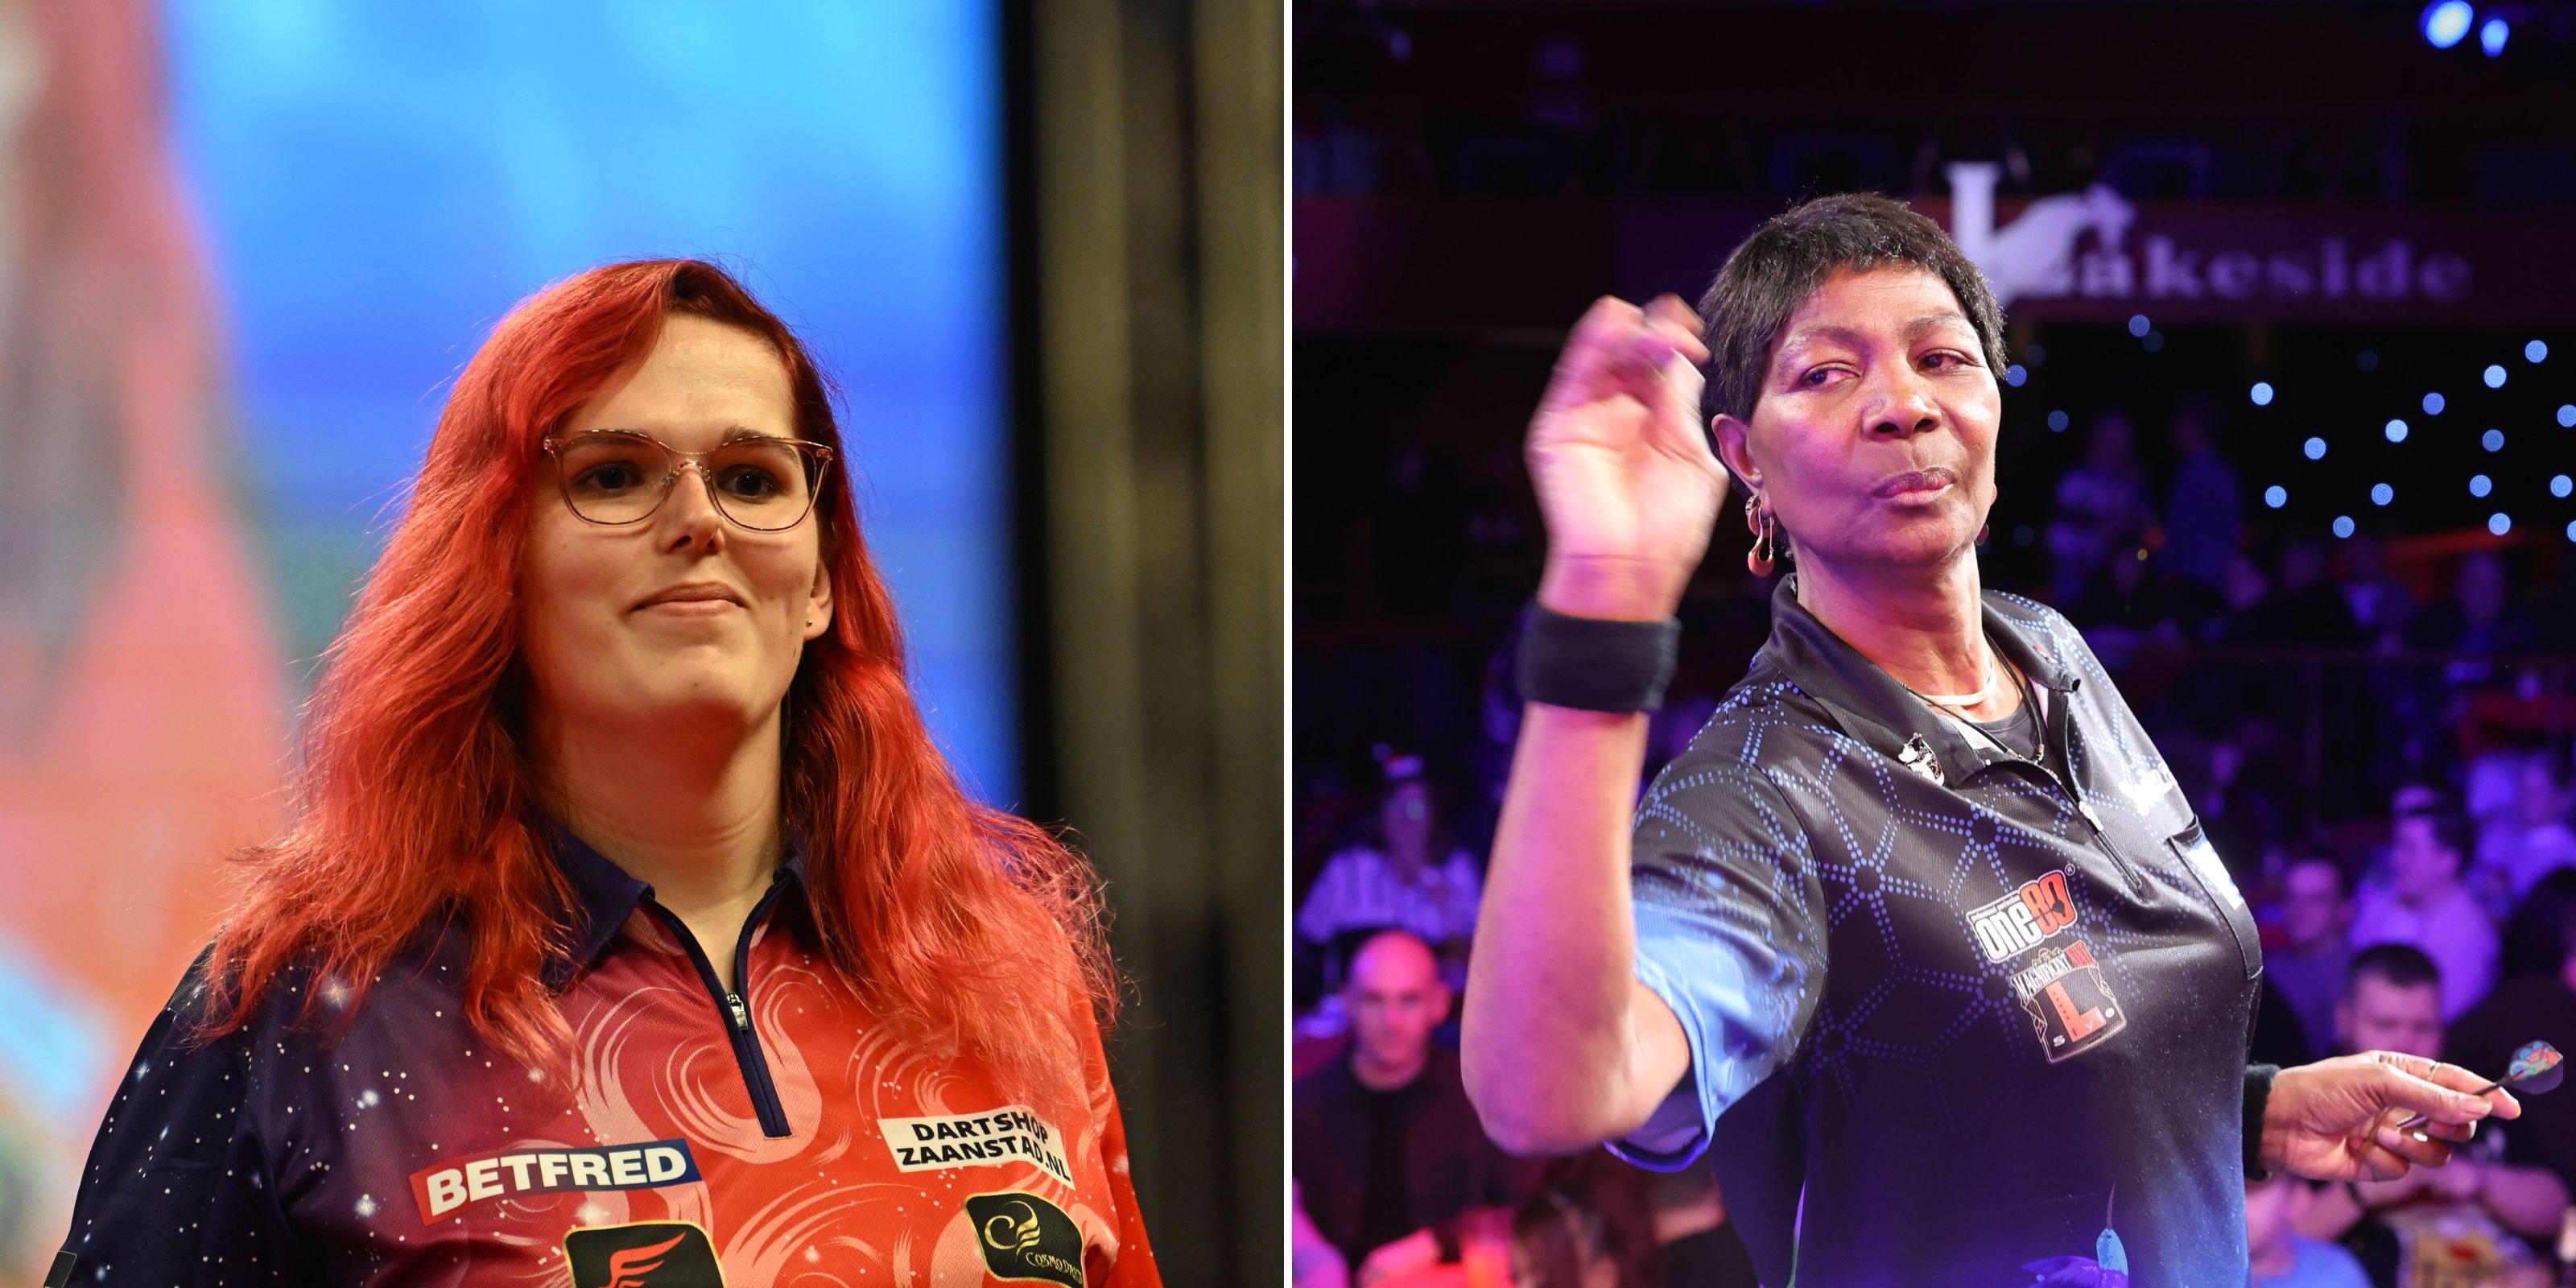 - trans athlete controversy: darts legend refuses to play against trans woman